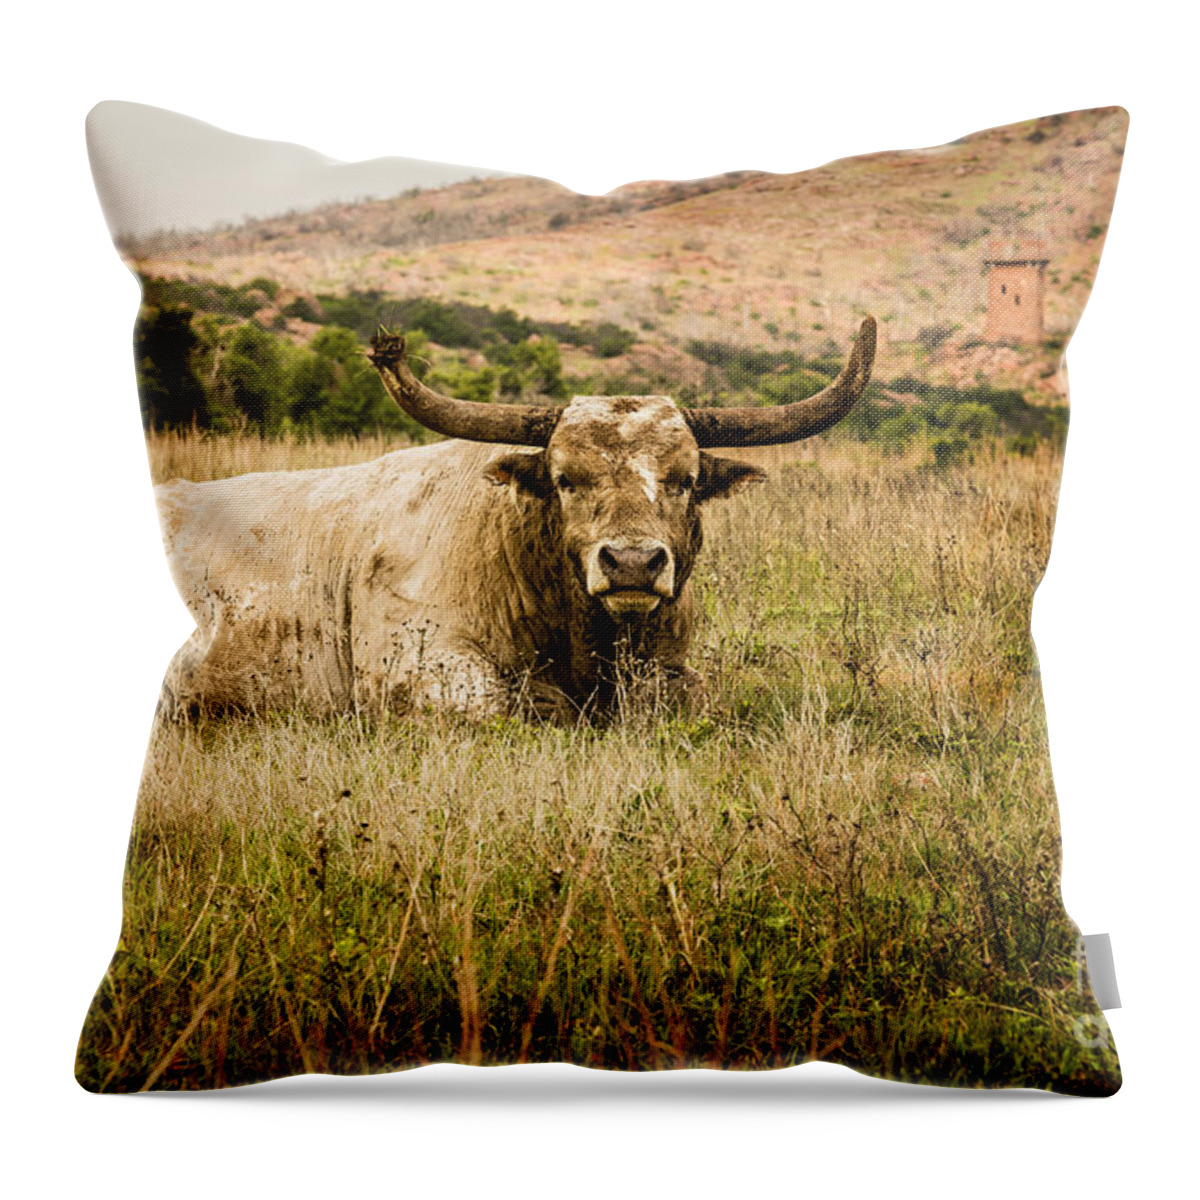 tamyra Ayles Throw Pillow featuring the photograph Bull Longhorn by Tamyra Ayles